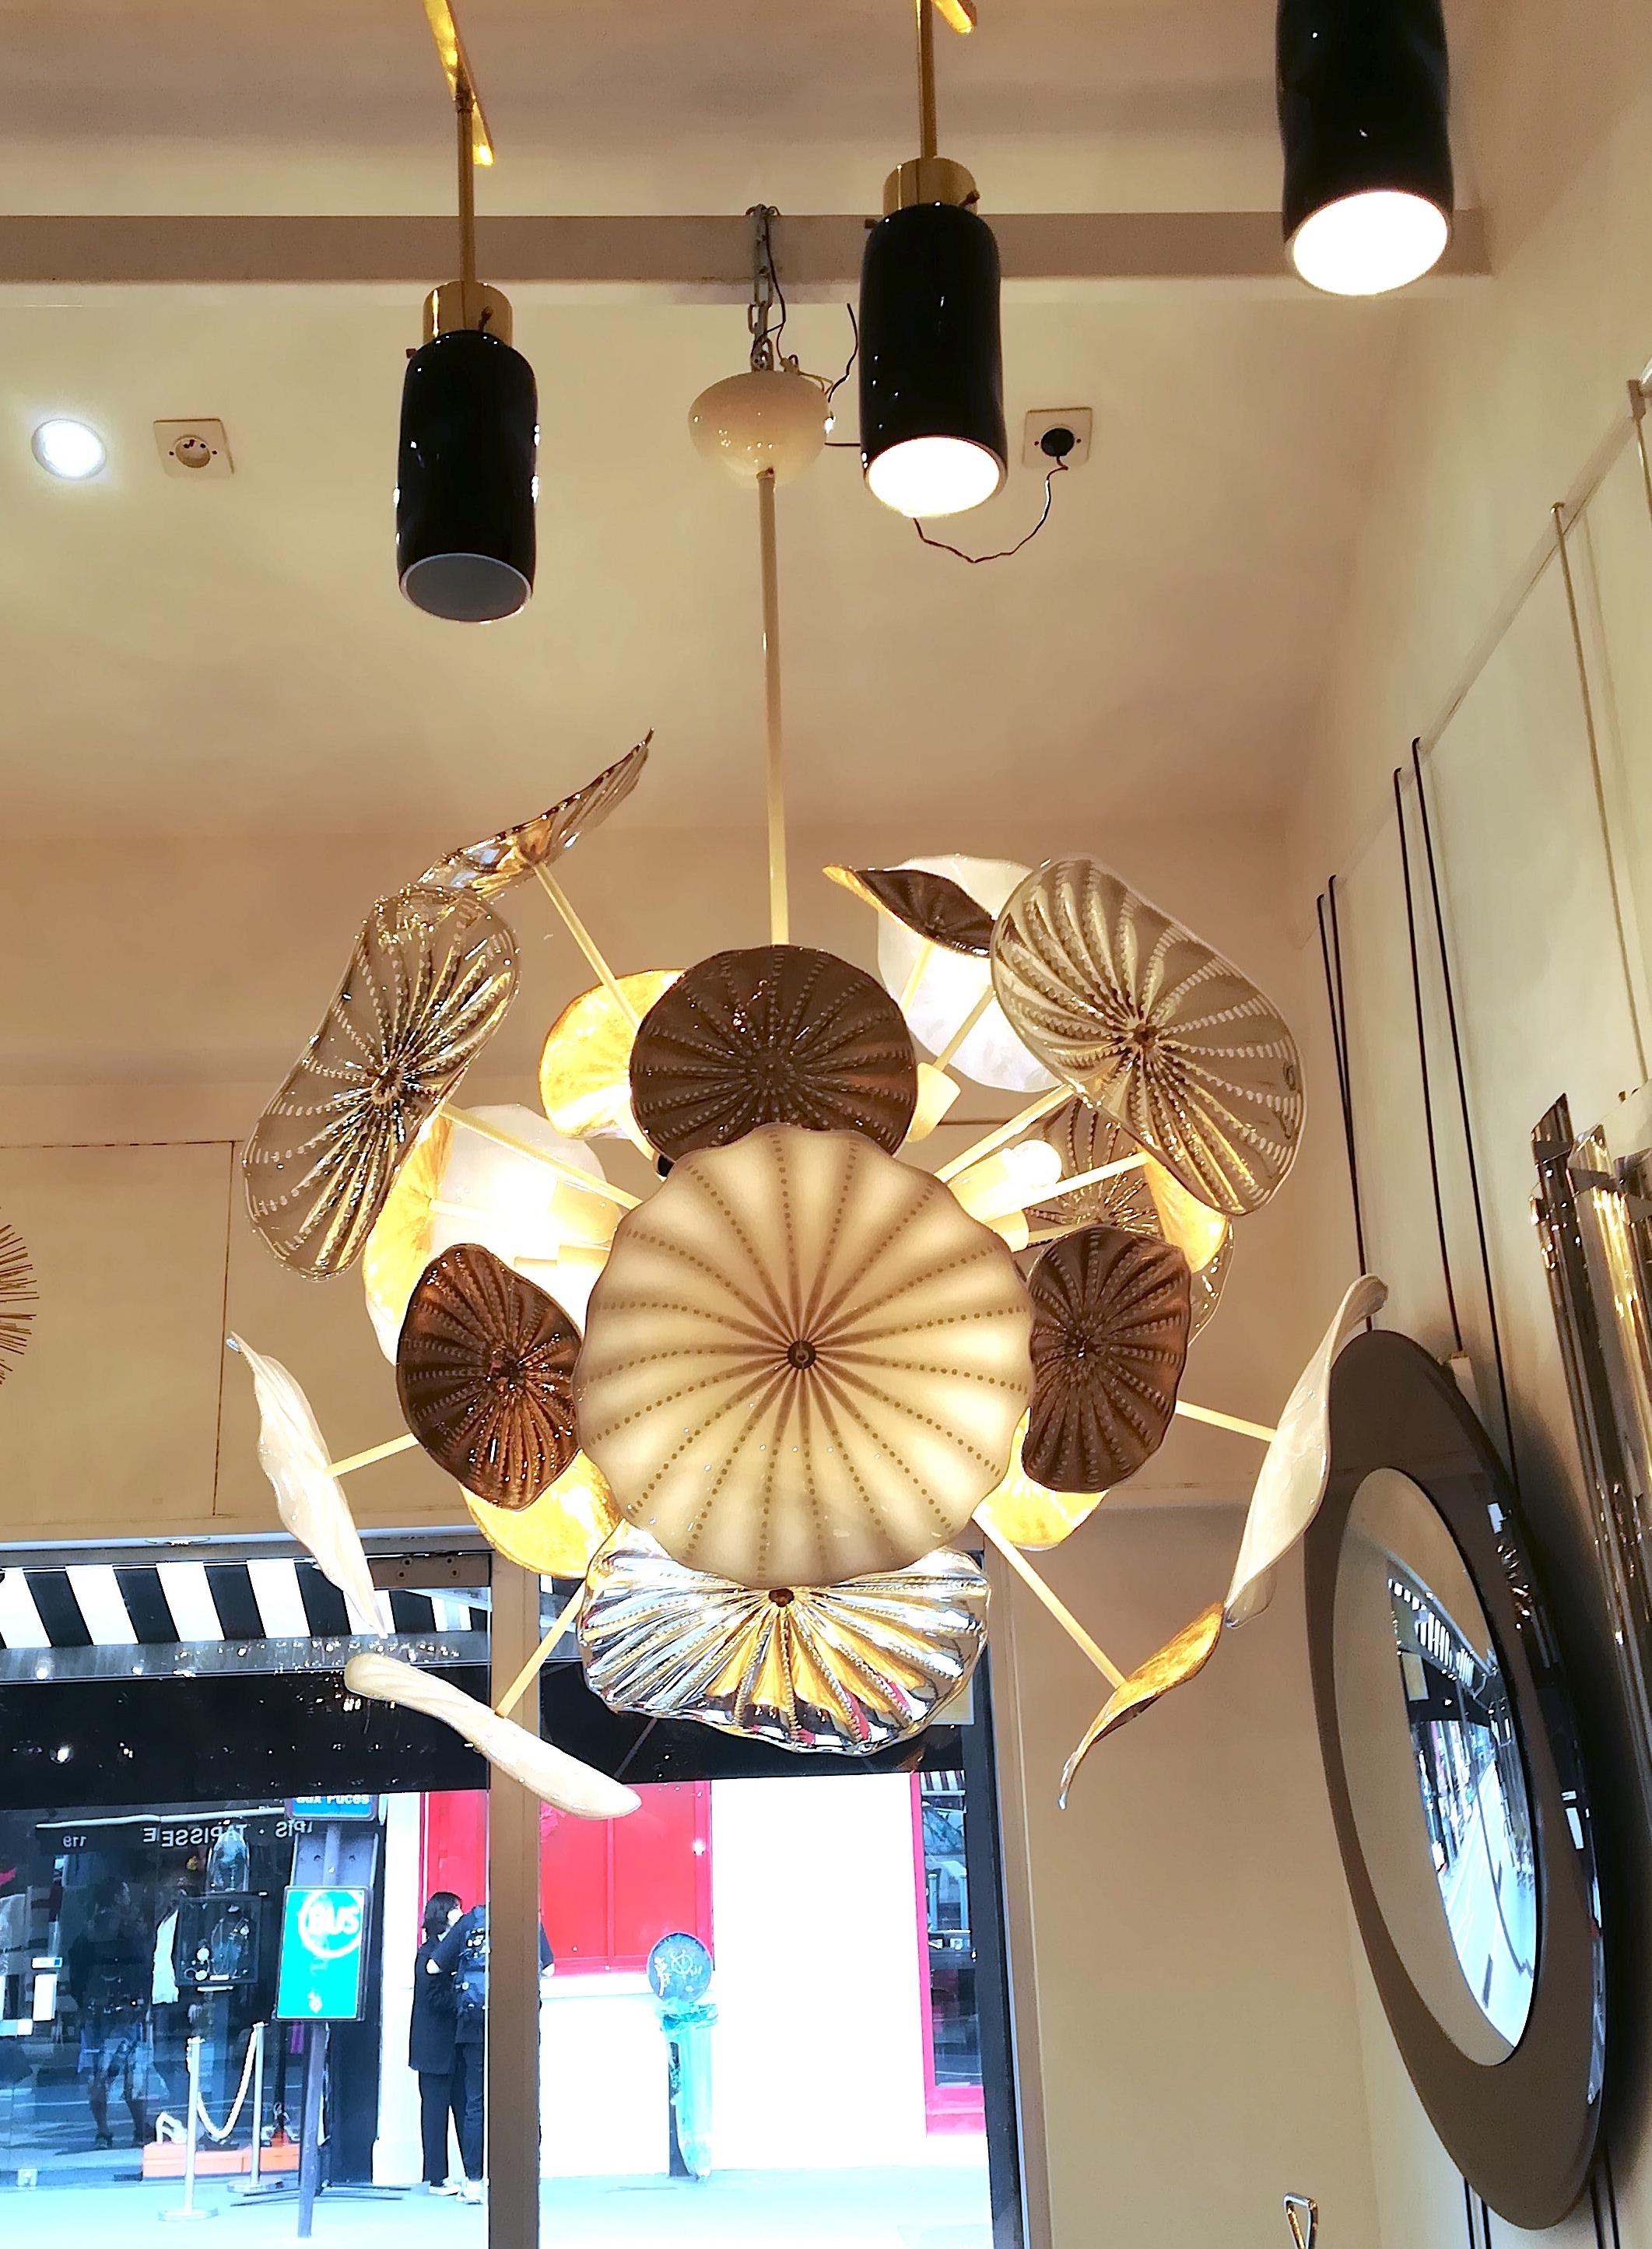 Jellyfih Sputnik Murano glass chandelier.
(grey, gold and transparent grey discs, all in Murano blown glass)
Structure 's color: clear beige (painted metal).